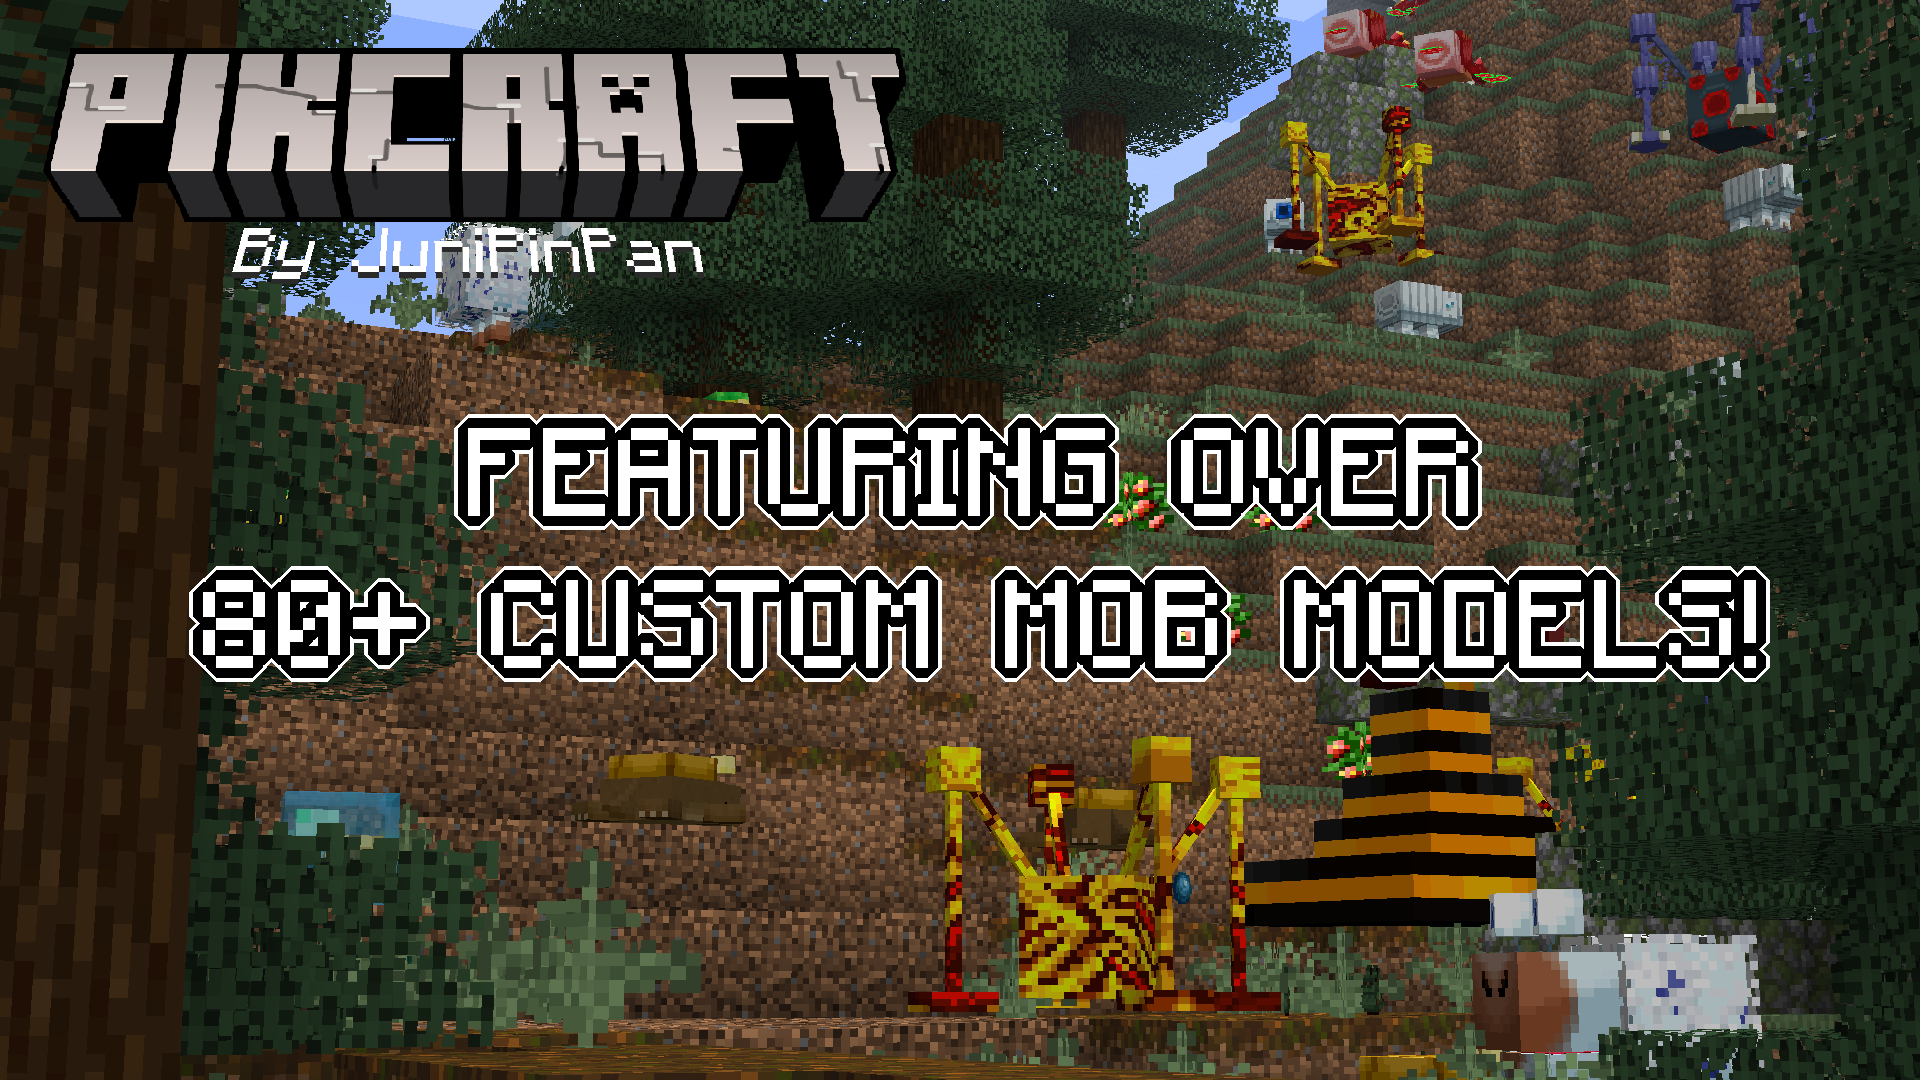 Featuring over 80+ Custom Mobs!